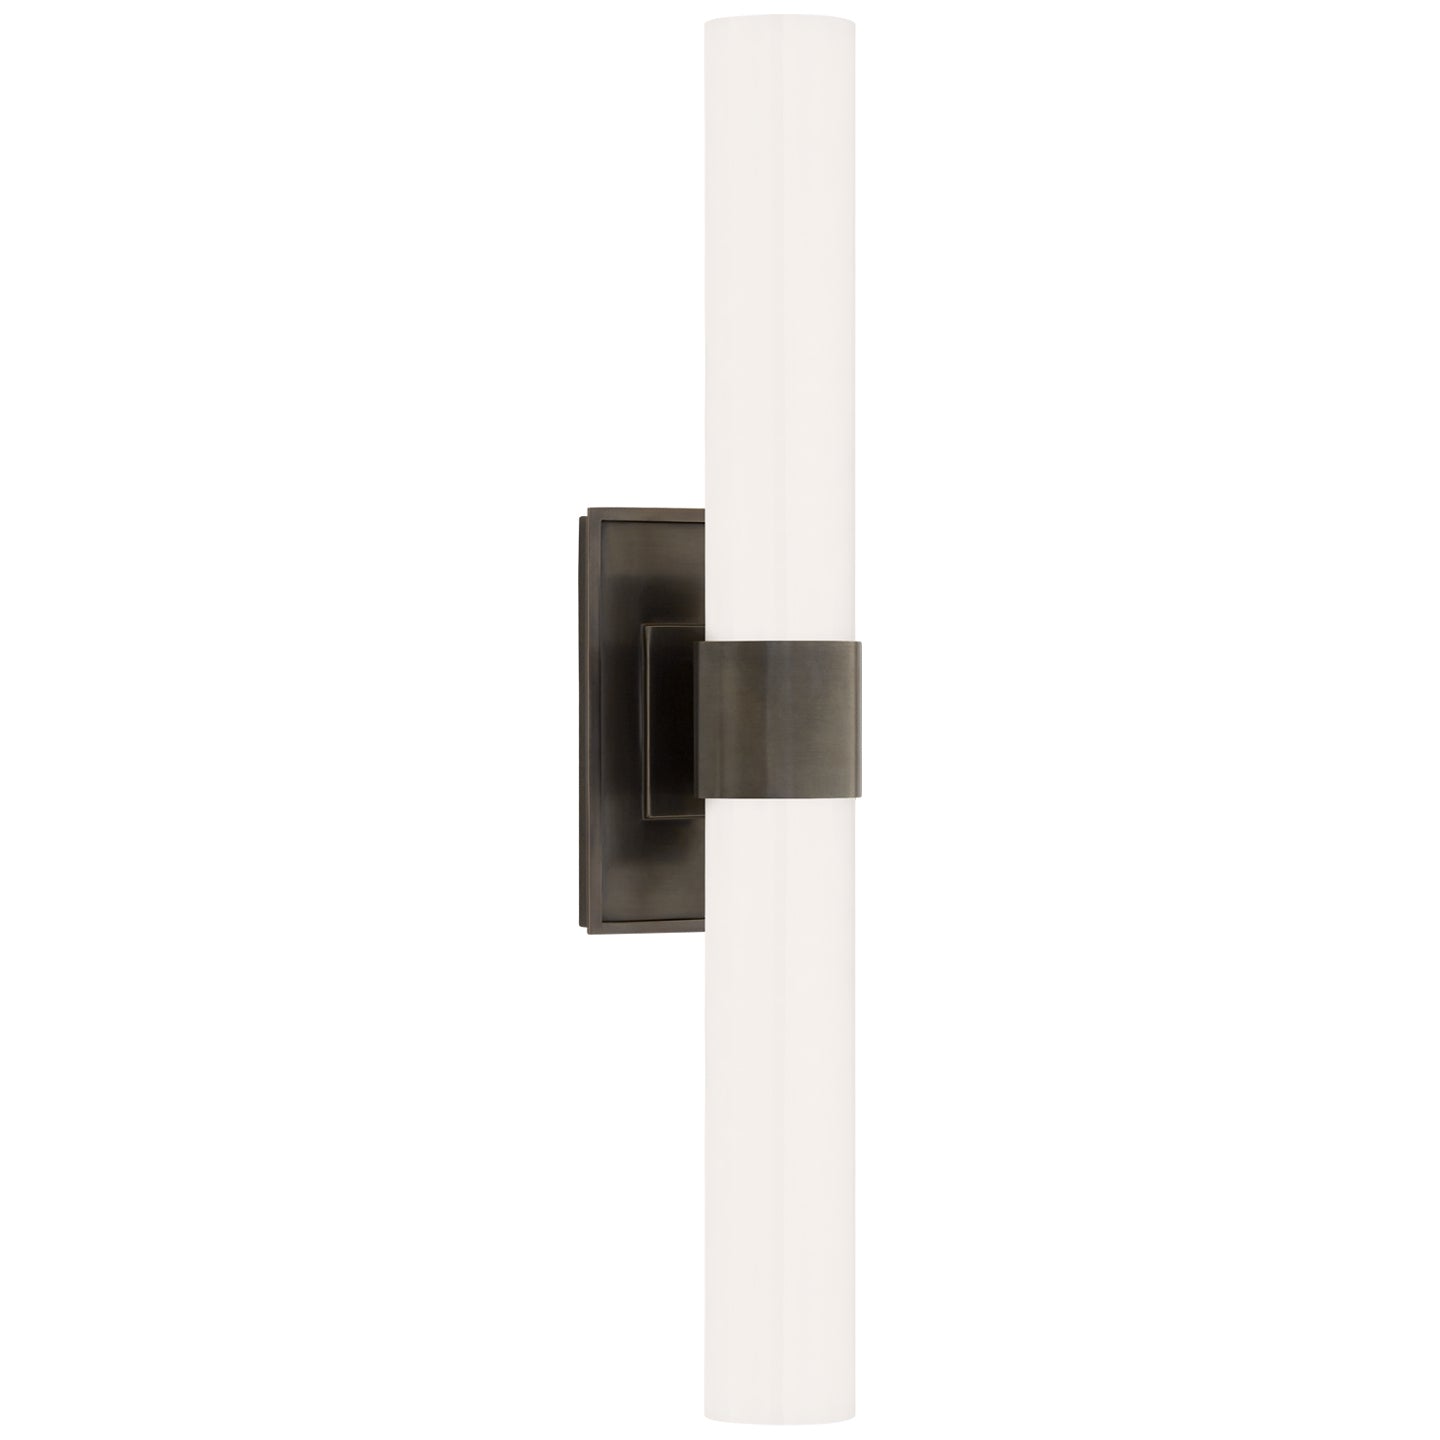 Load image into Gallery viewer, Visual Comfort Signature - S 2164BZ-WG - Two Light Wall Sconce - Presidio - Bronze
